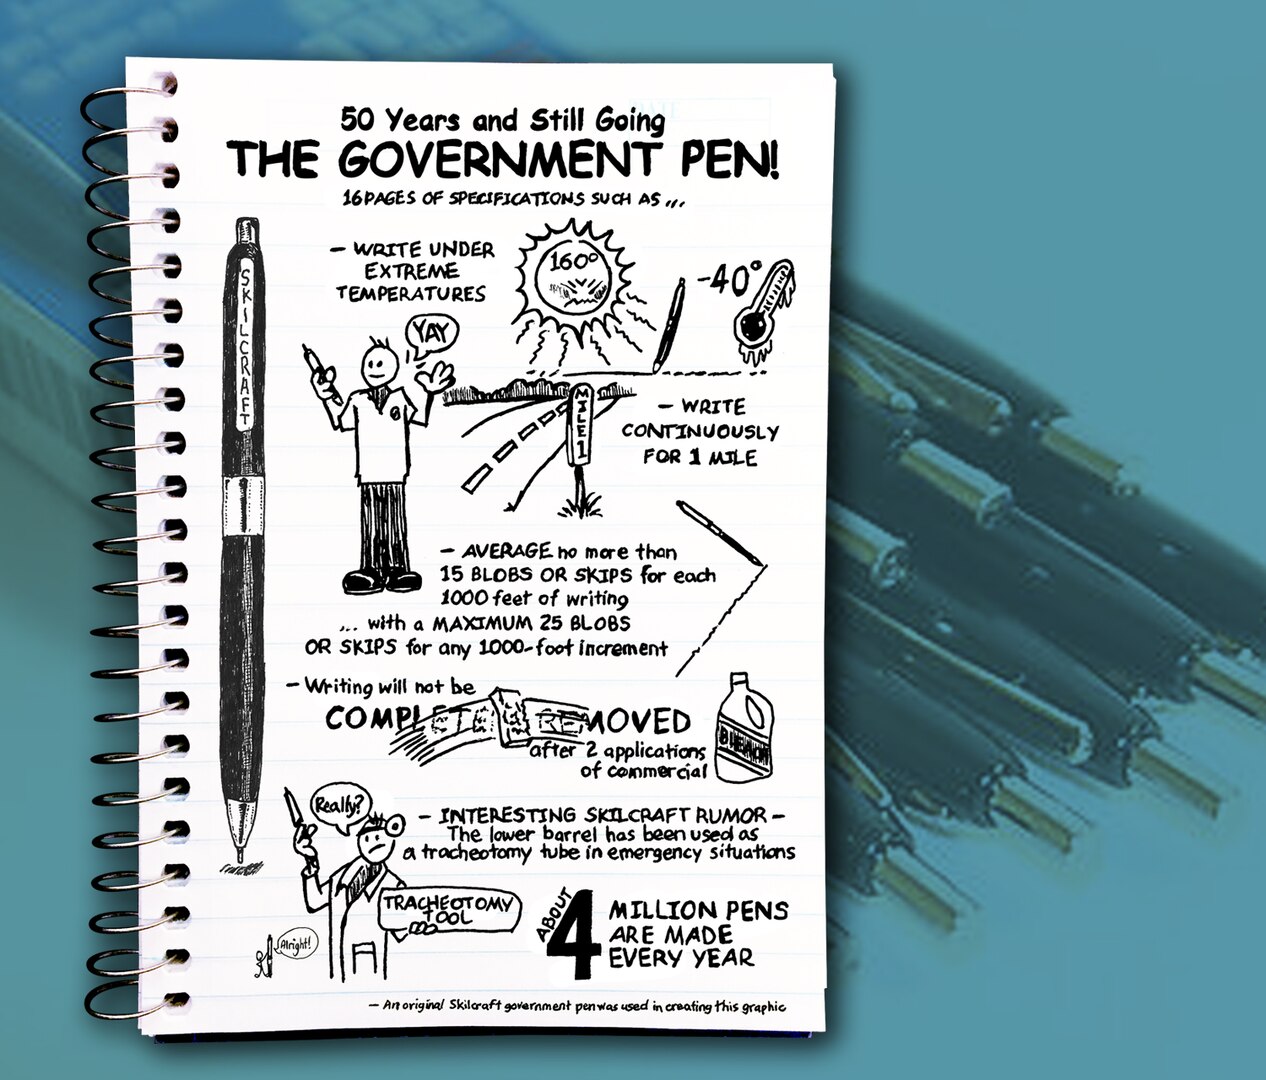 The Government Pen Turns 50.